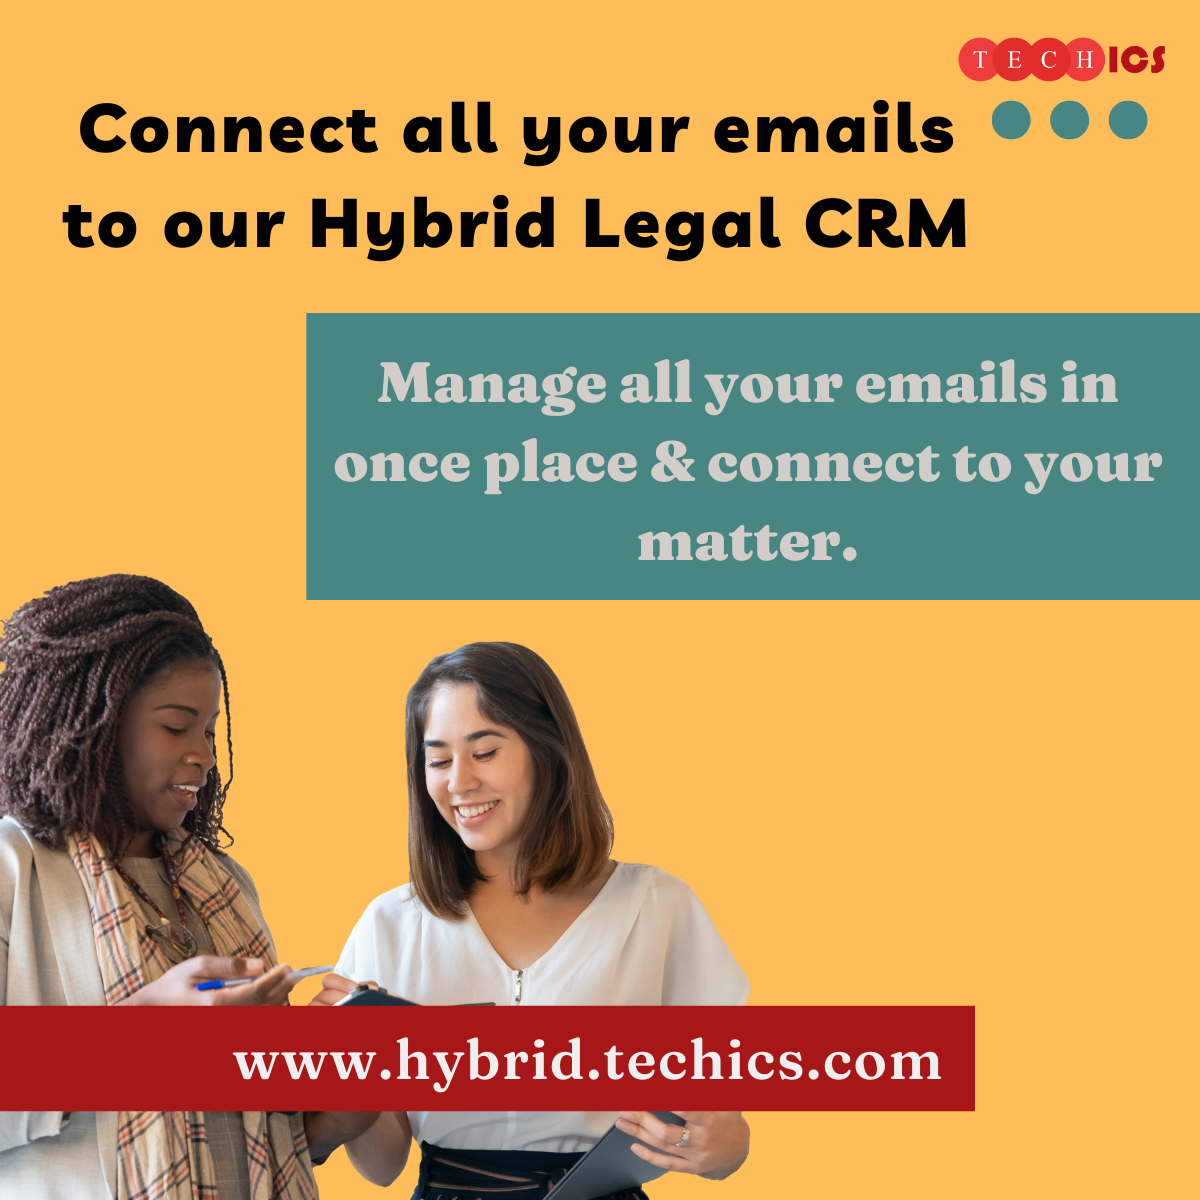 Email integration with Hybrid Legal CRM